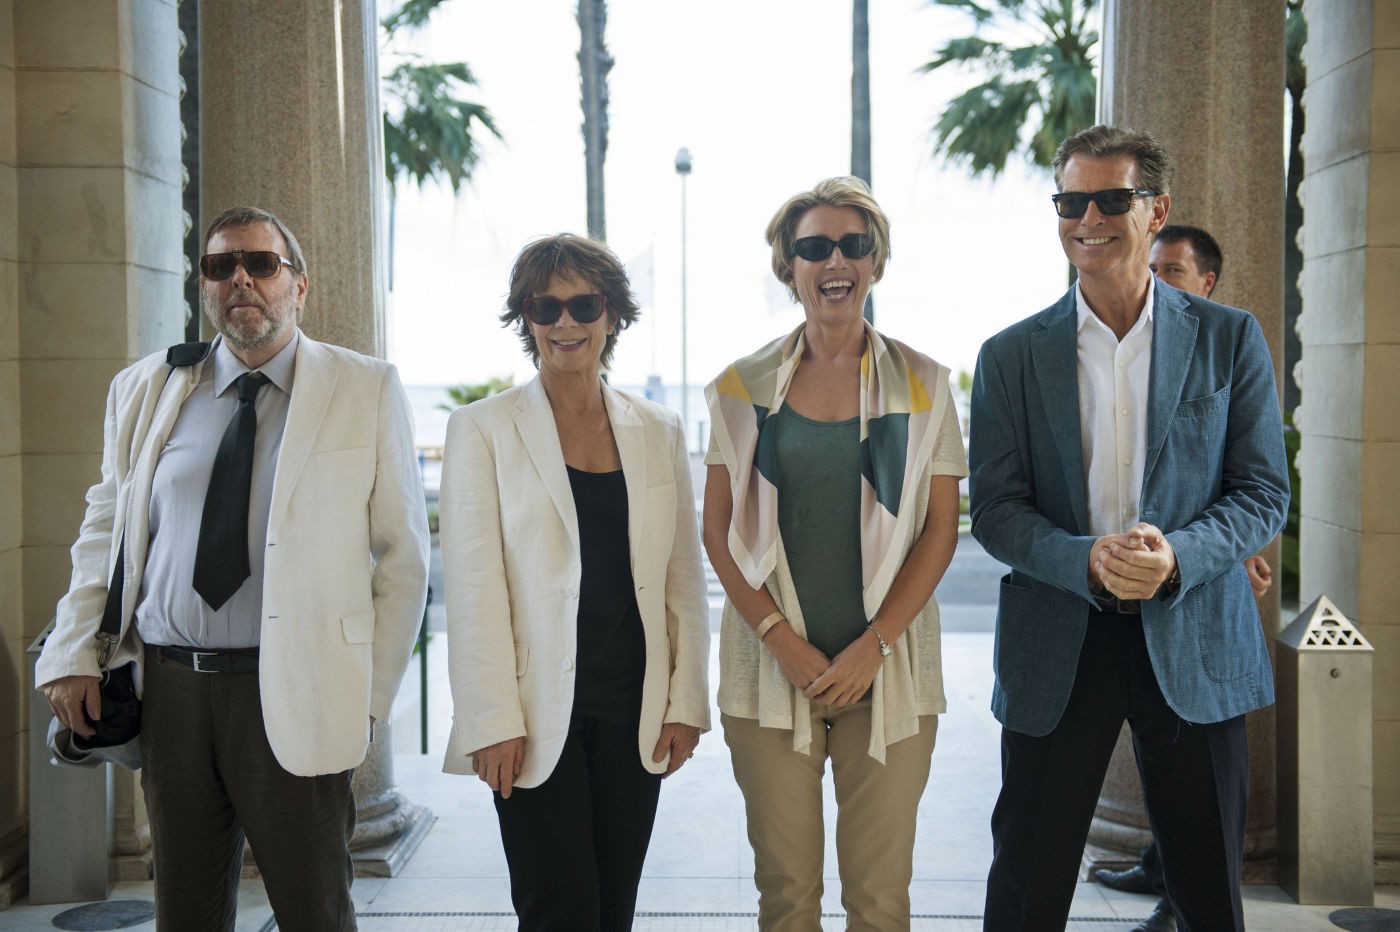 Timothy Spall, Celia Imrie, Emma Thompson and Pierce Brosnan in Ketchup Entertainment's The Love Punch (2014)